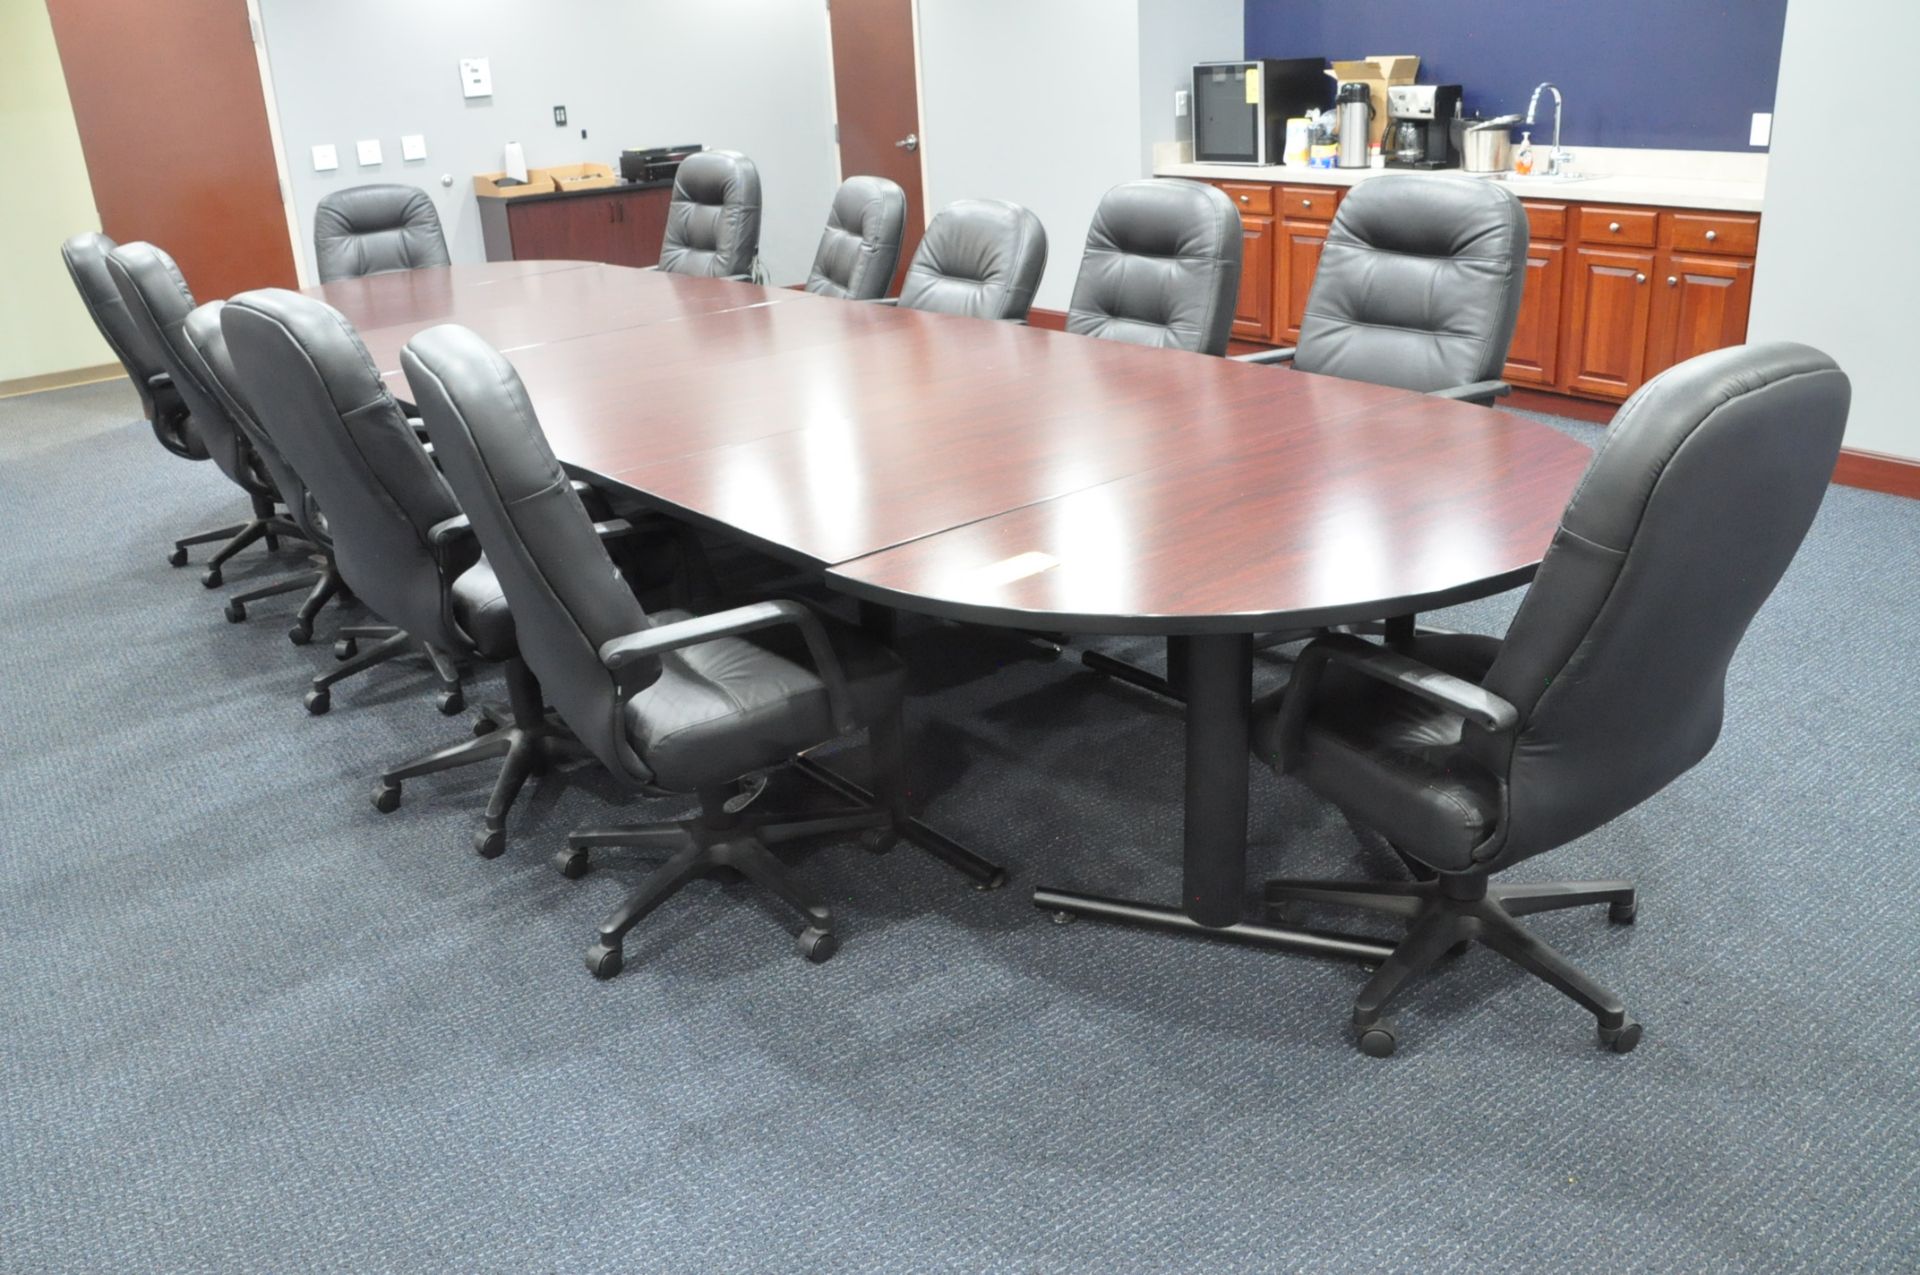 5' x 17' 6" Oval 7-Piece Sectional Conference Table with (12) Black Vinyl Swivel Office Chairs and